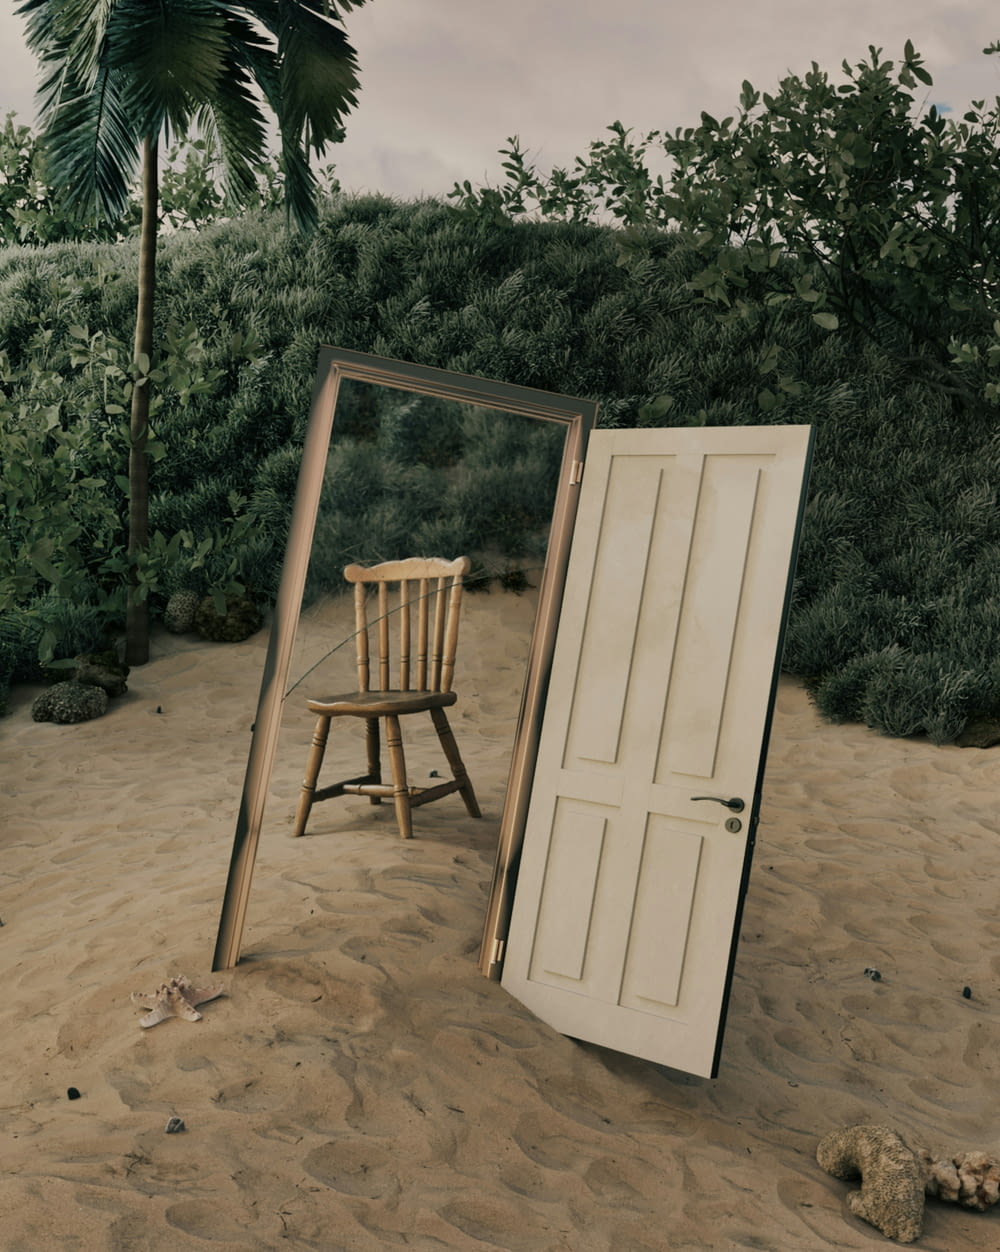 a wooden chair sitting in the sand next to a mirror